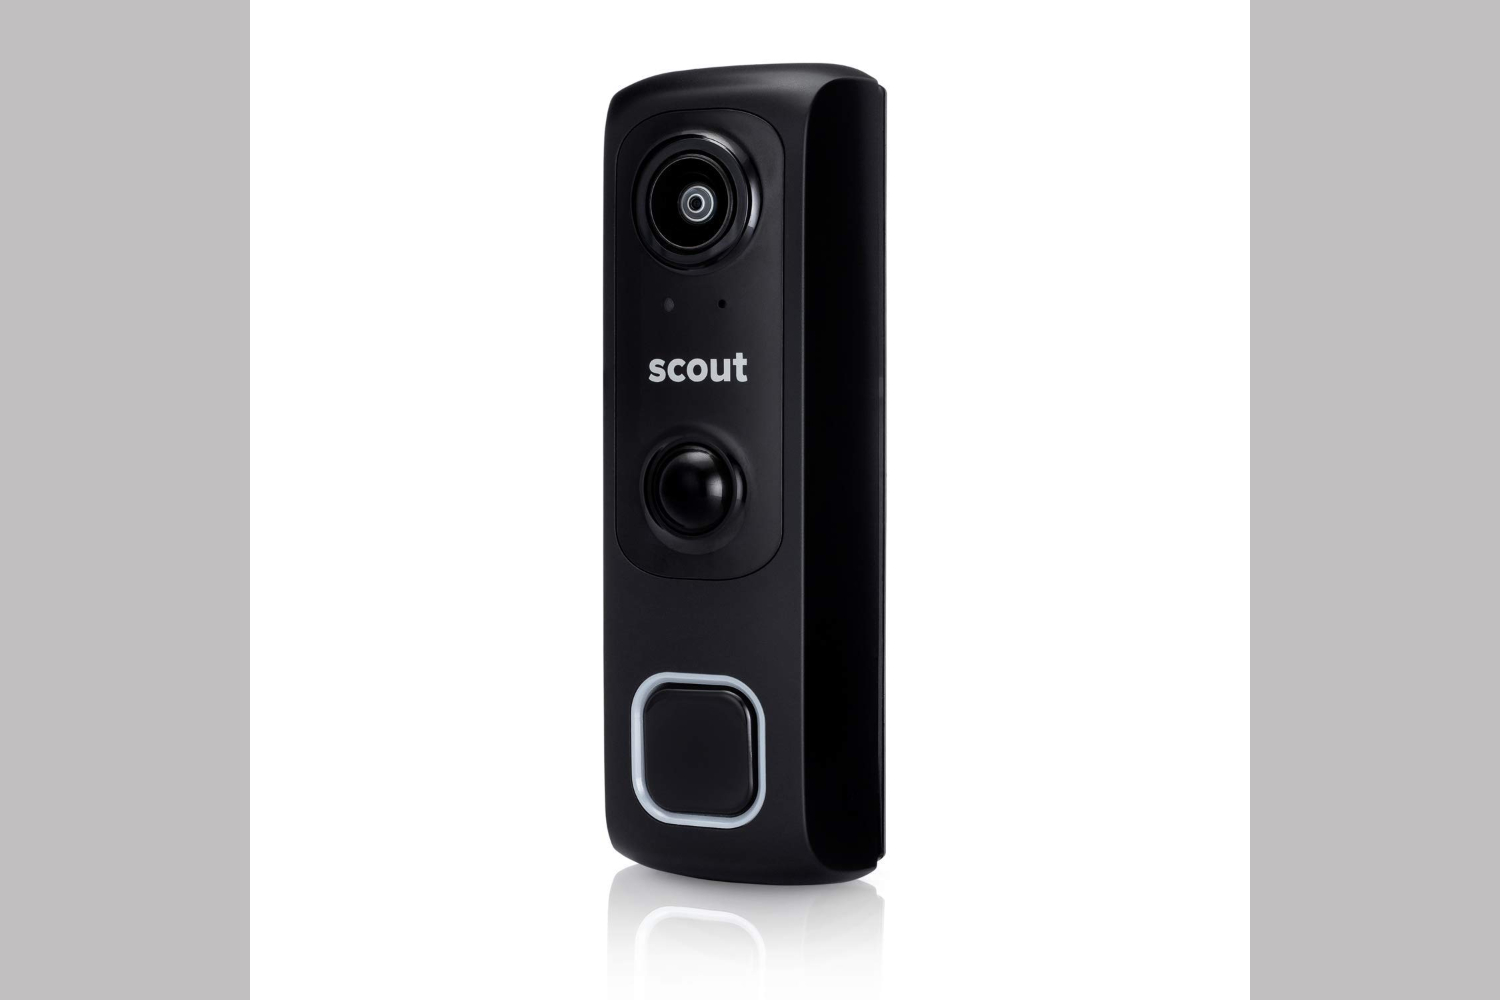 amazon drops post prime day deals on scout alarm diy smart home security kits video doorbell  1